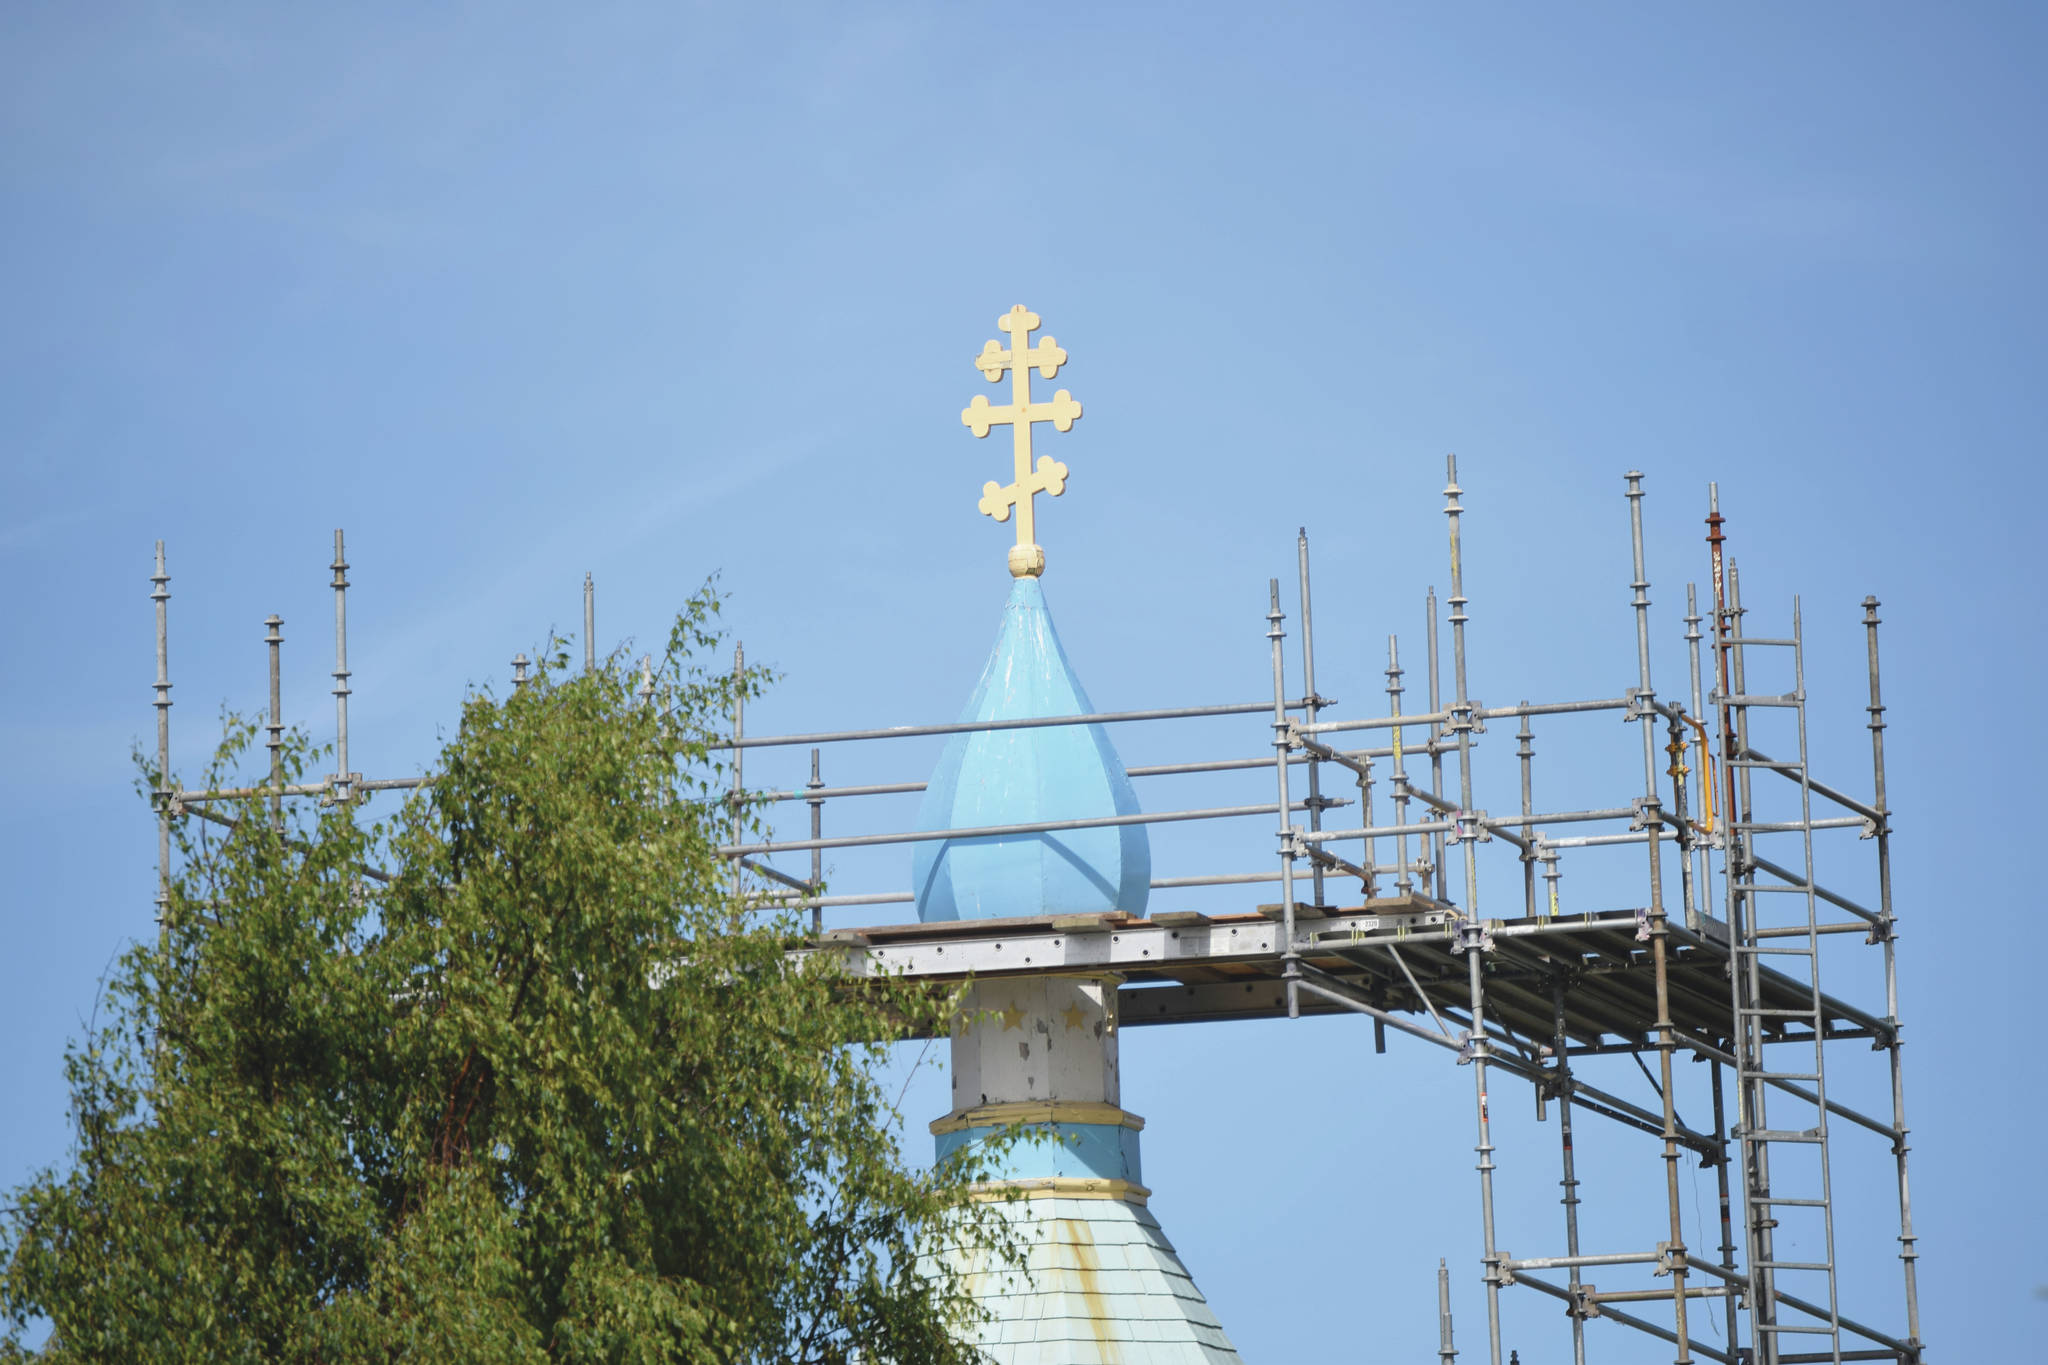 Scaffolding is erected around the Holy Assumption of the Virgin Mary Russian Orthodox Church in Kenai, Alaska, on Monday, July 20, 2020. (Photo by Jeff Helminiak/Peninsula Clarion)